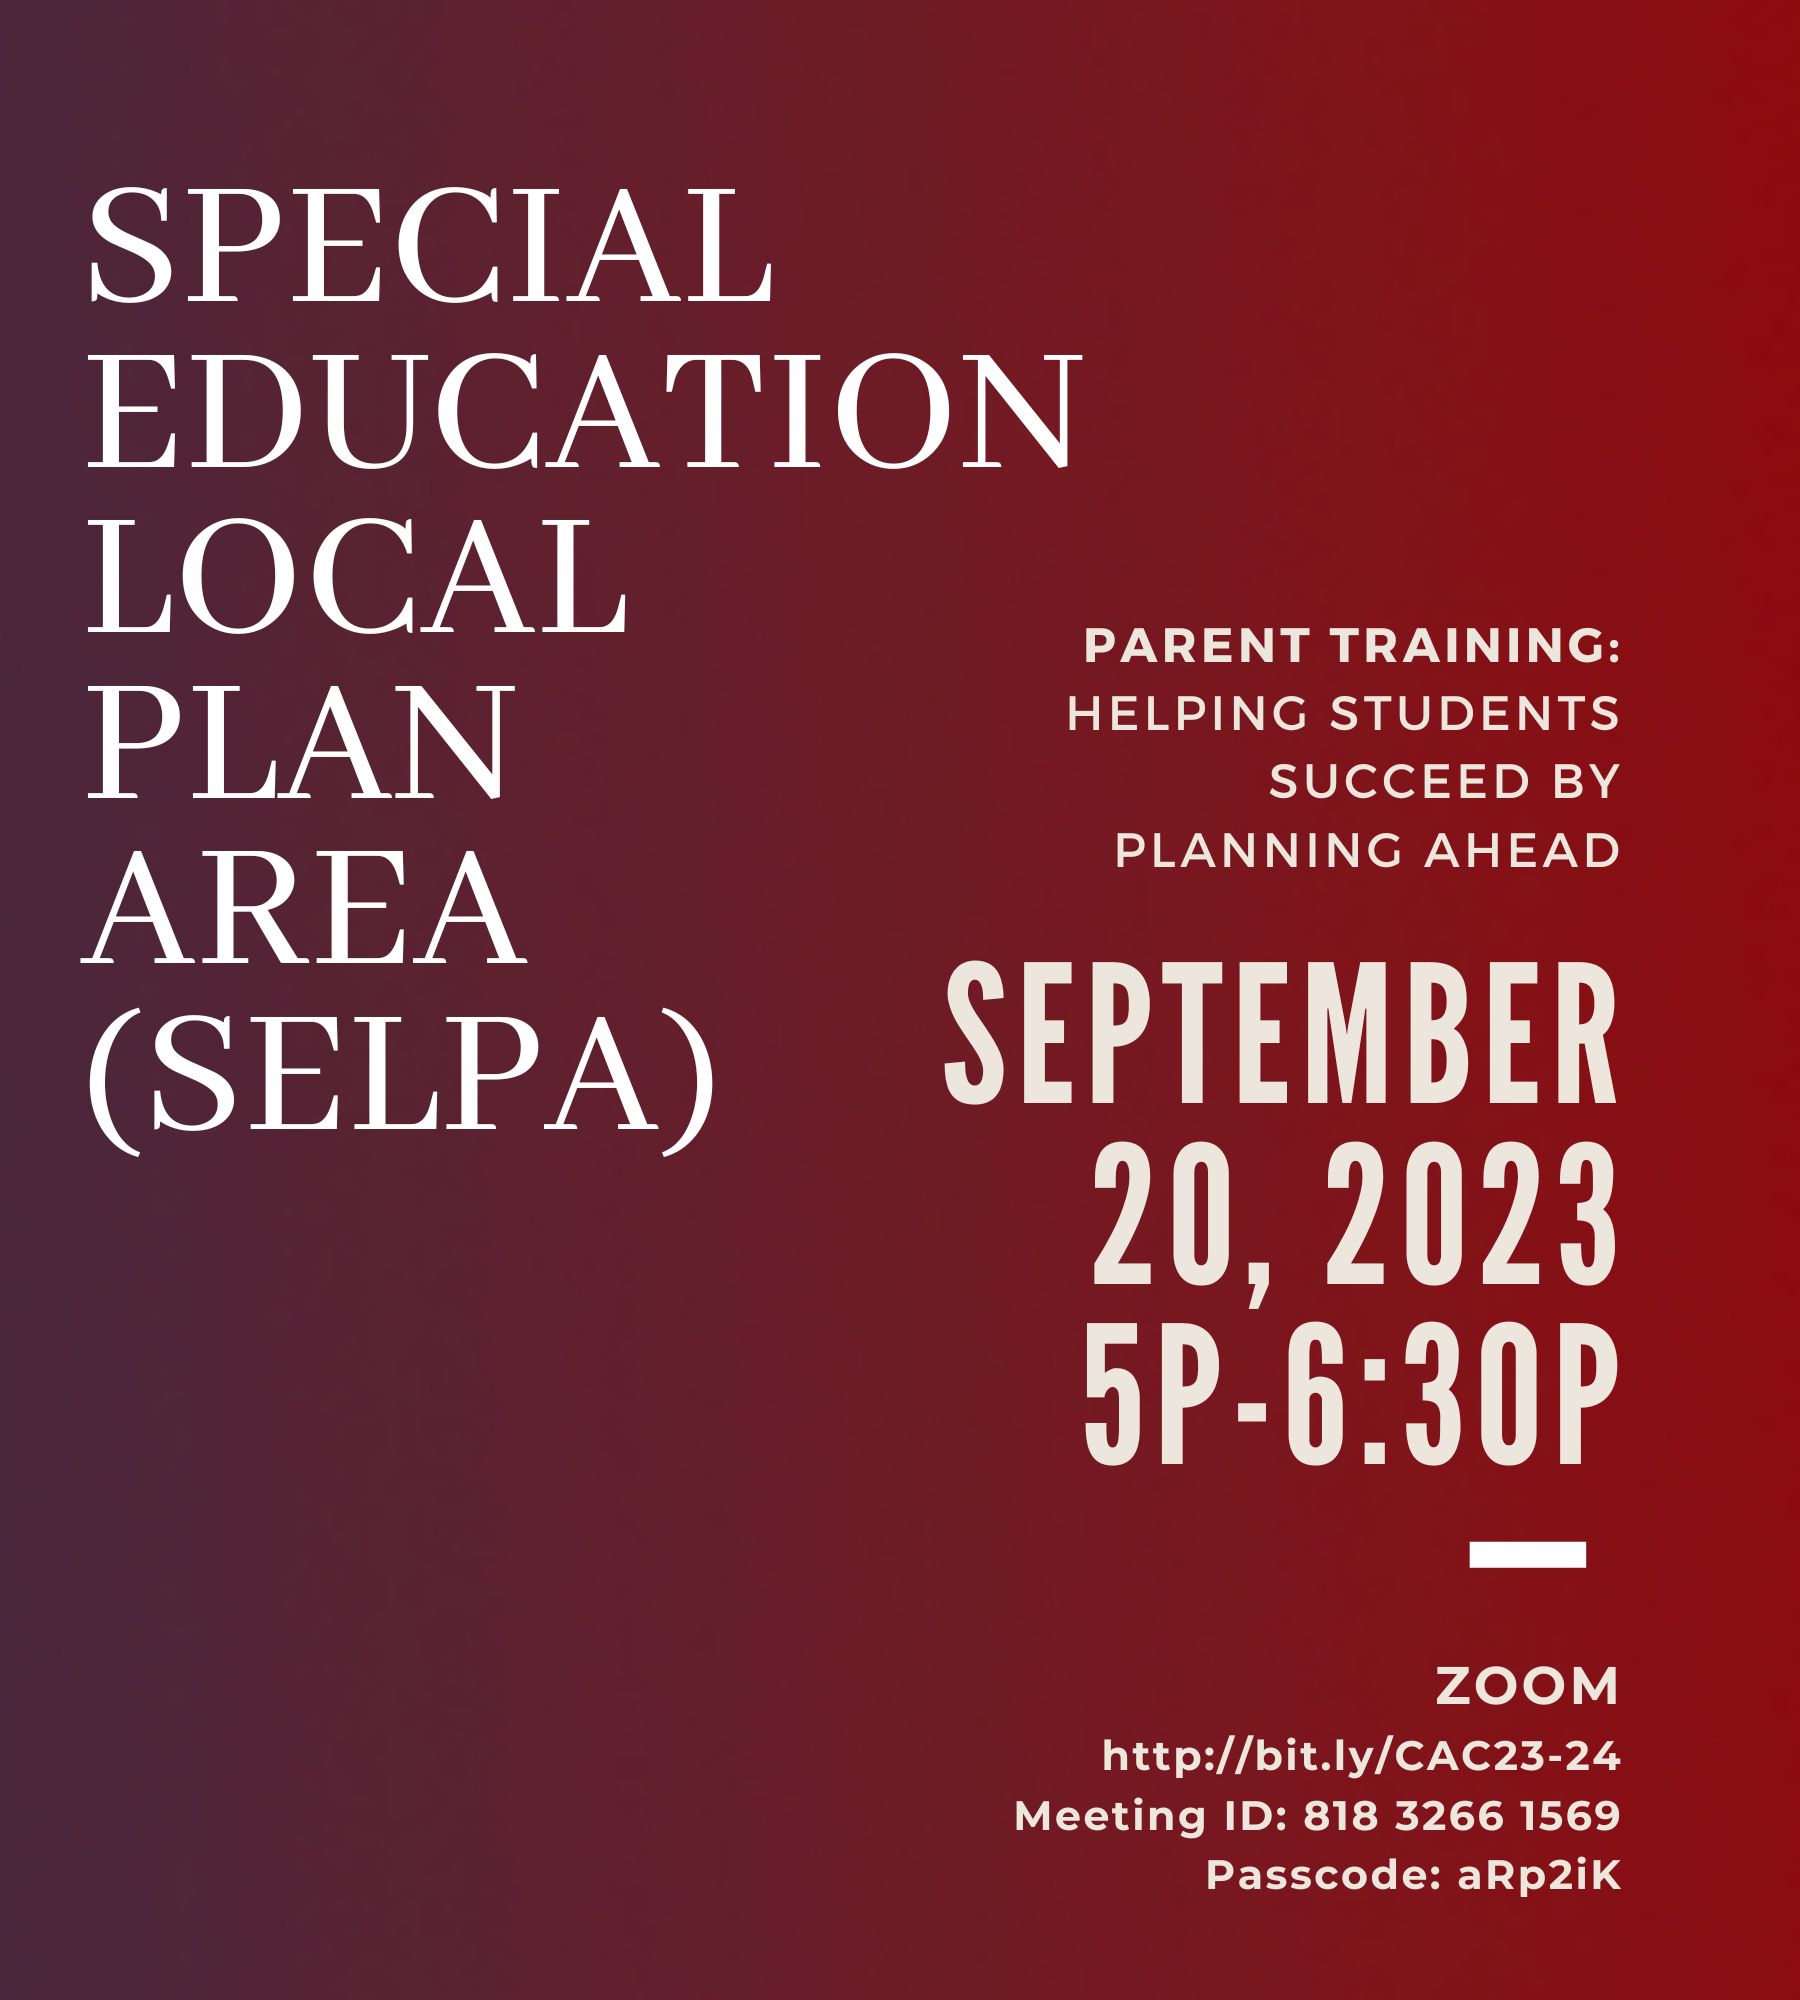 SELPA Parent Traning: Helping Students Succeed by Planning Ahead, September 20, 2023, 5pm-6:30pm, on ZOOM